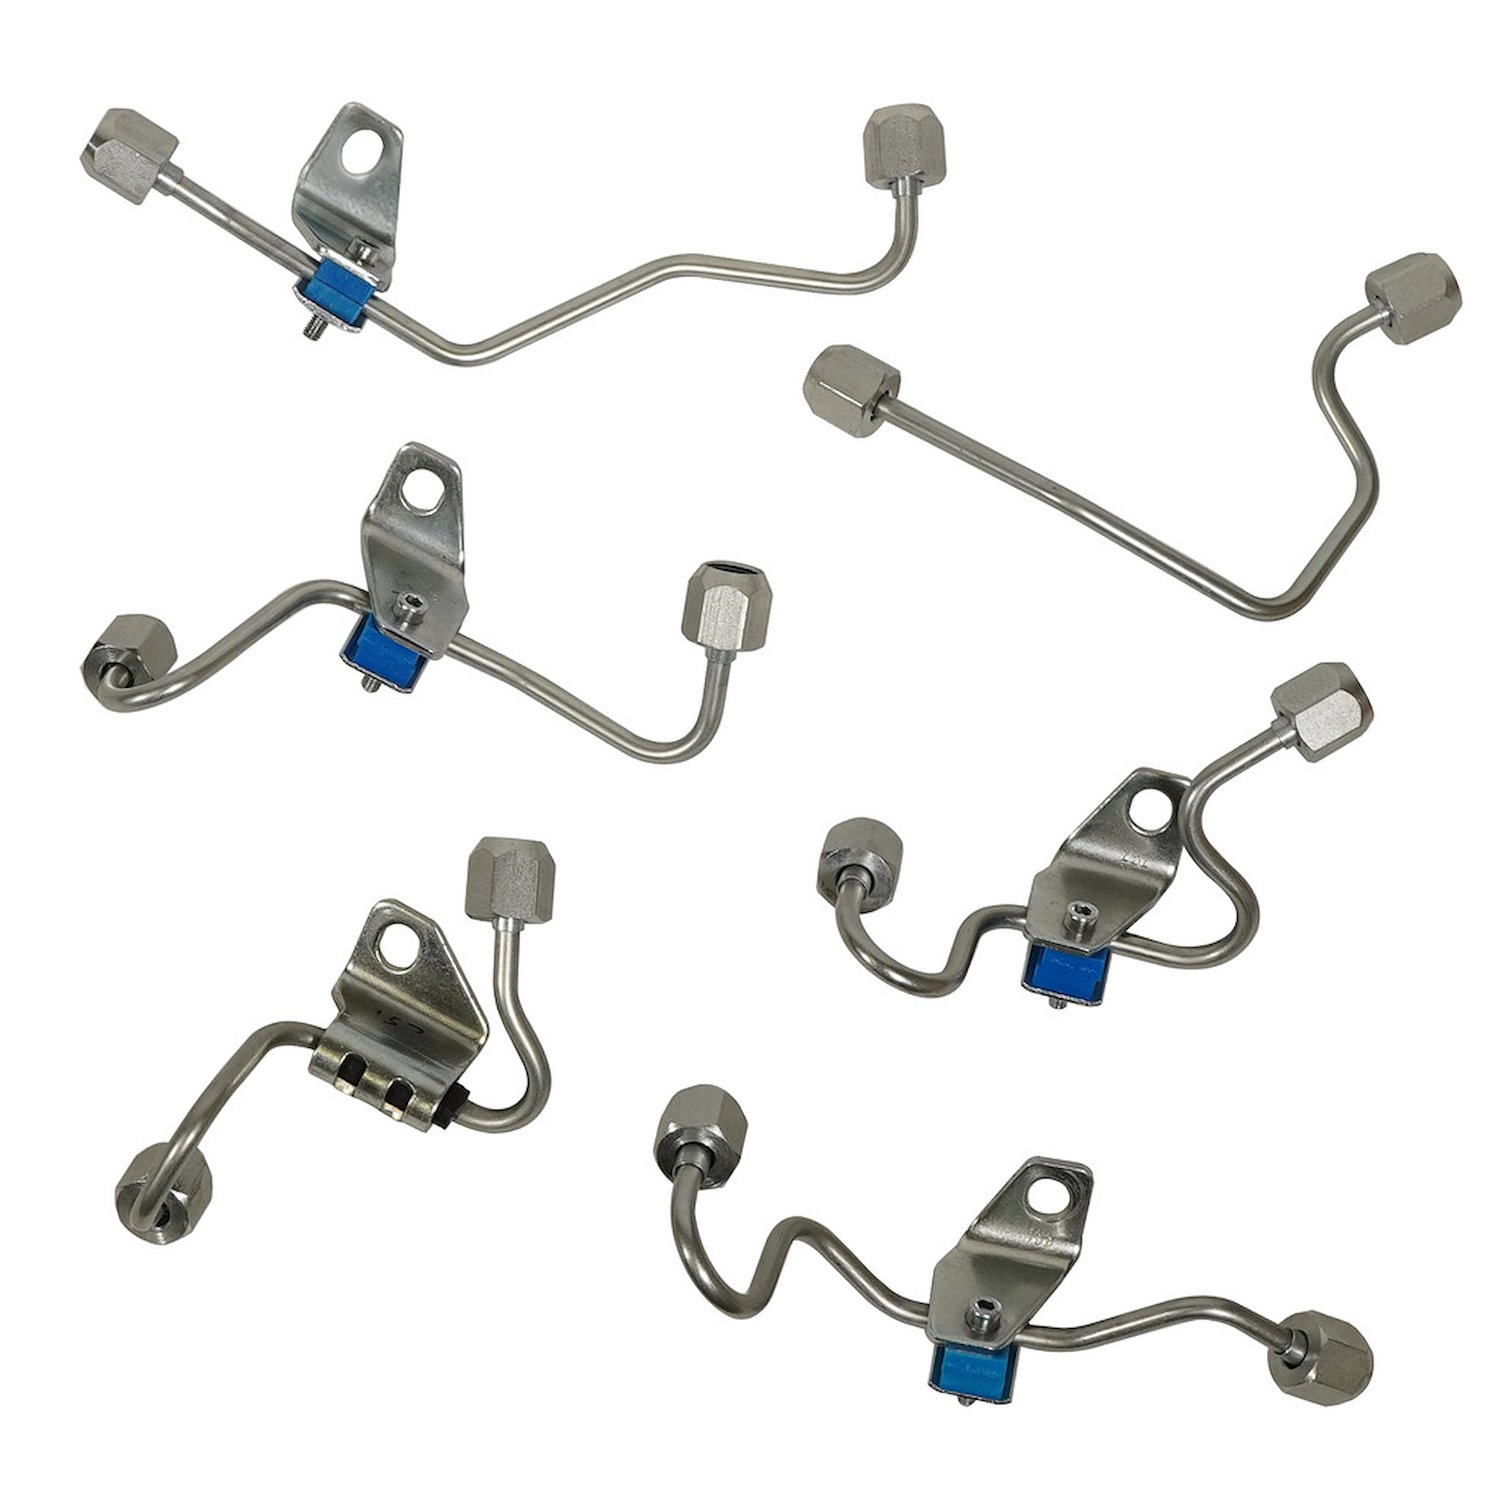 1050150 Injector Feed Line Set for 2003-2007 5.9L Cummins 24 Valve Engines